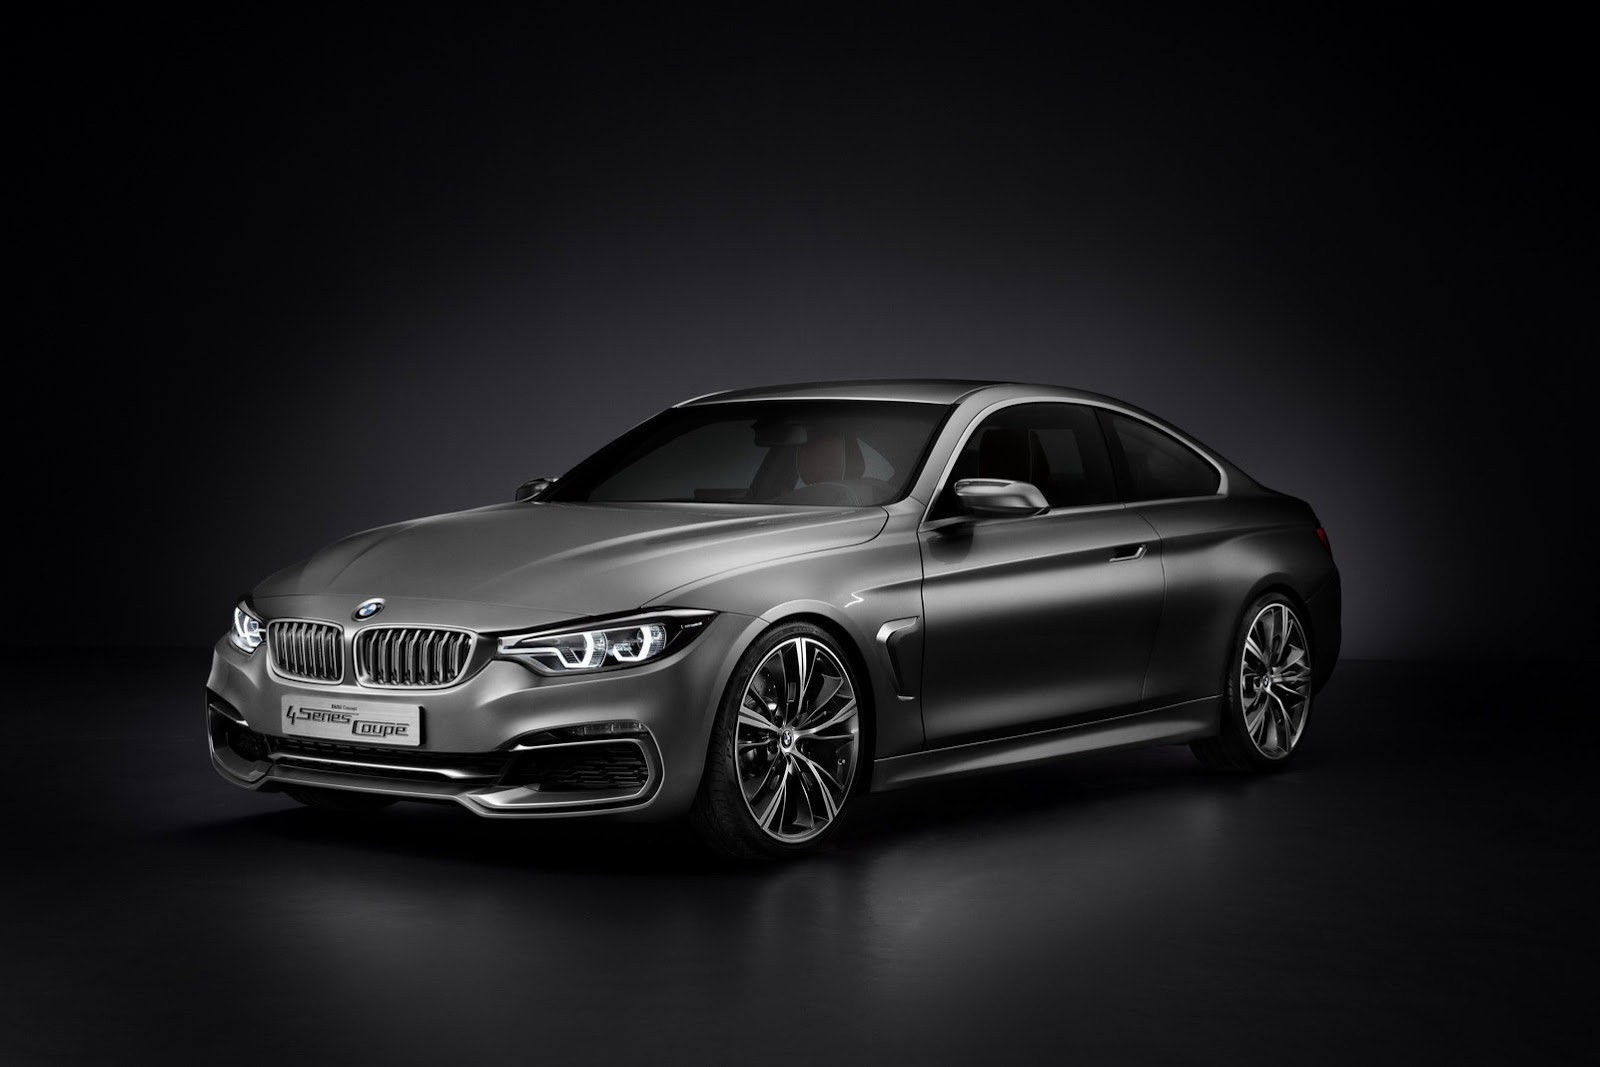 BMW looking for even better sales in 2013